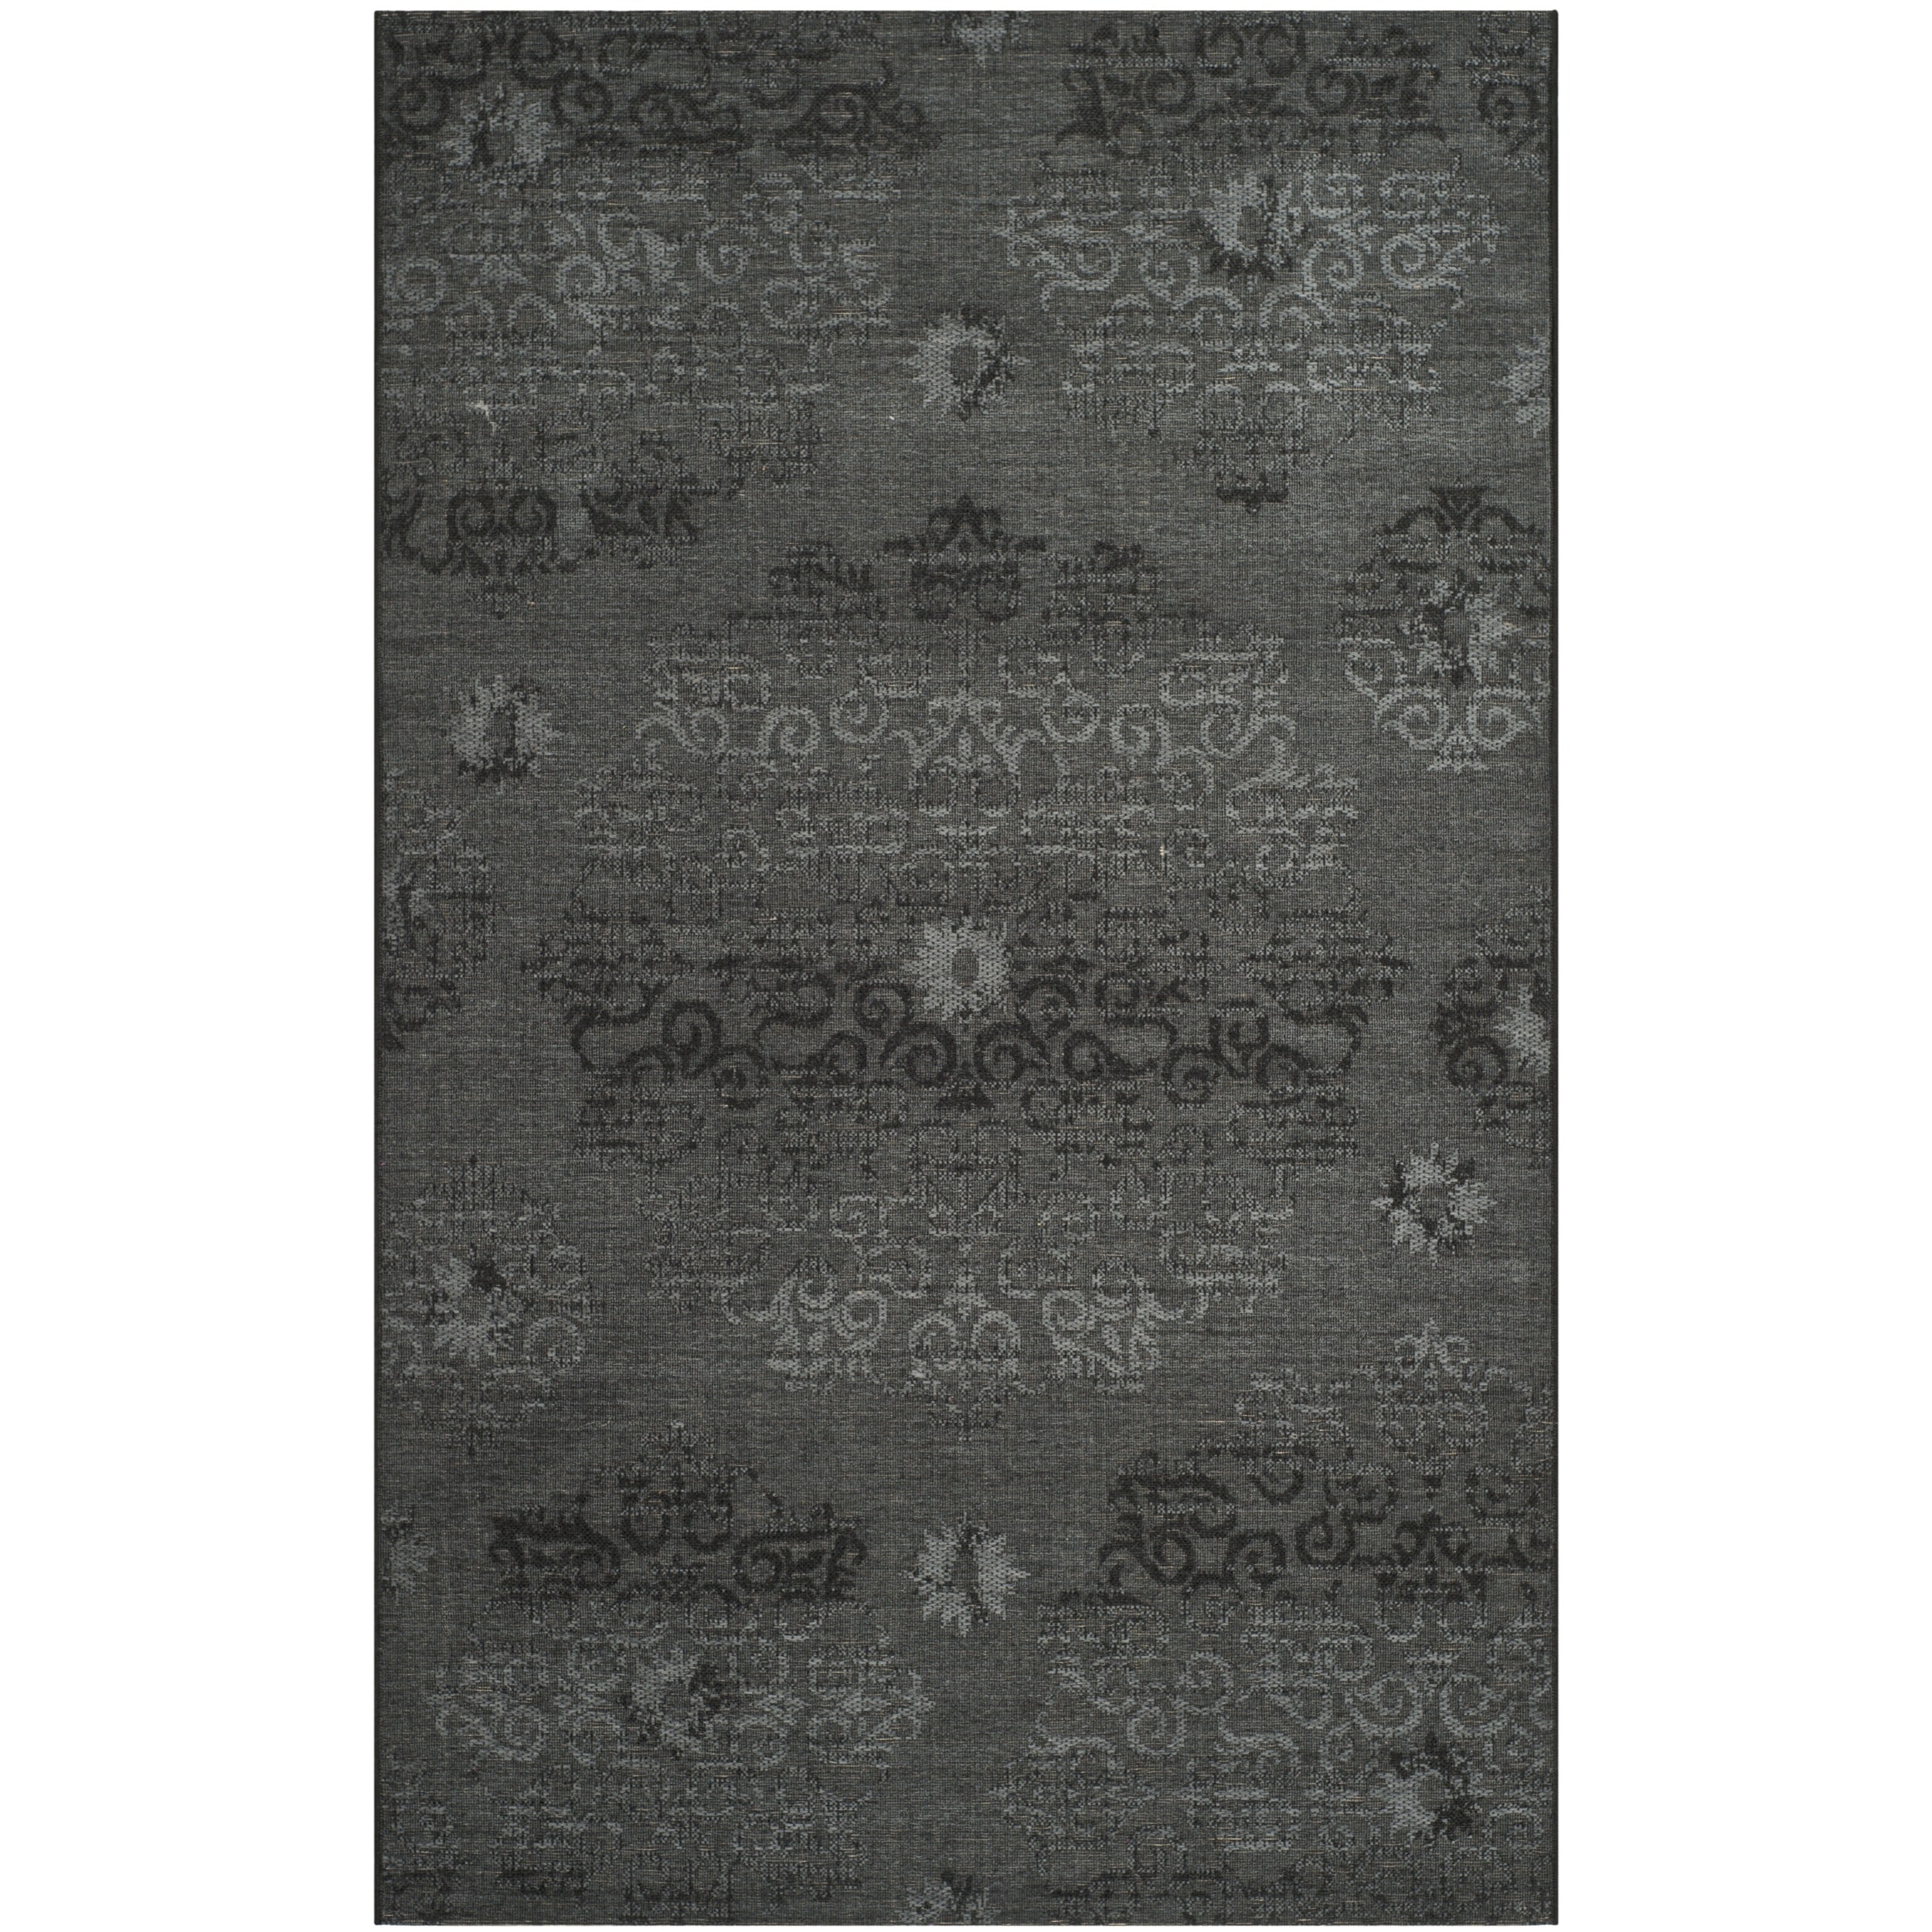 Safavieh Palazzo Black/gray Over dyed Chenille Area Rug (5 X 8)